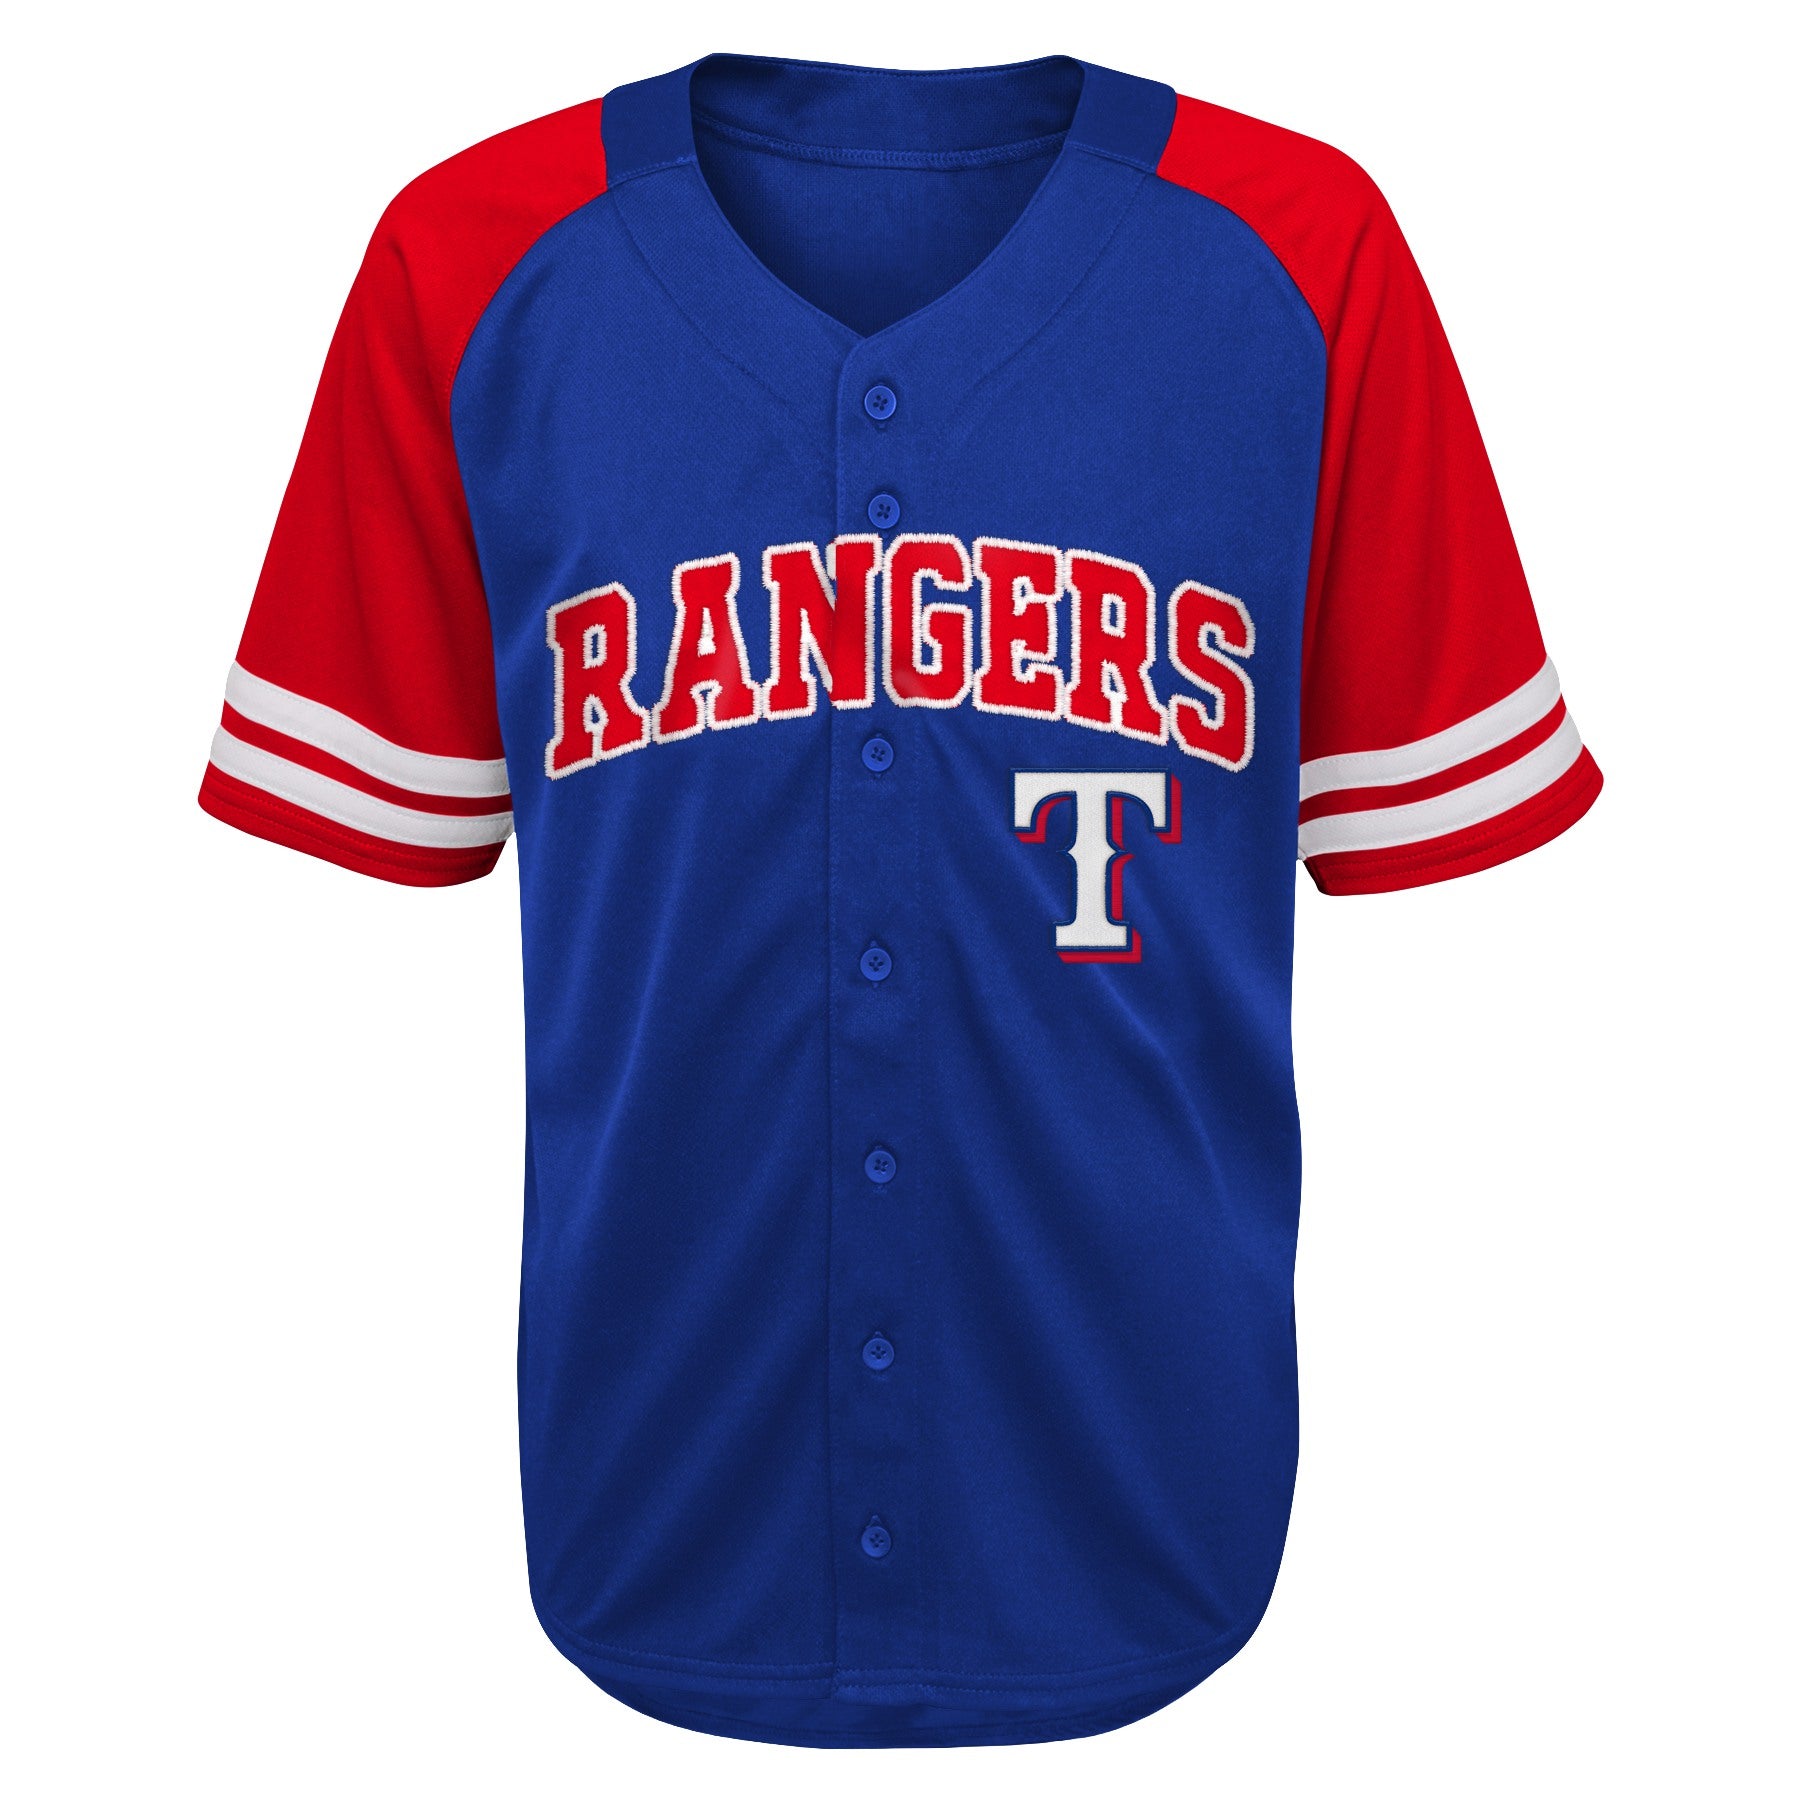 Texas rangers jersey, Shirts, Red And Blue Rangers Jersey